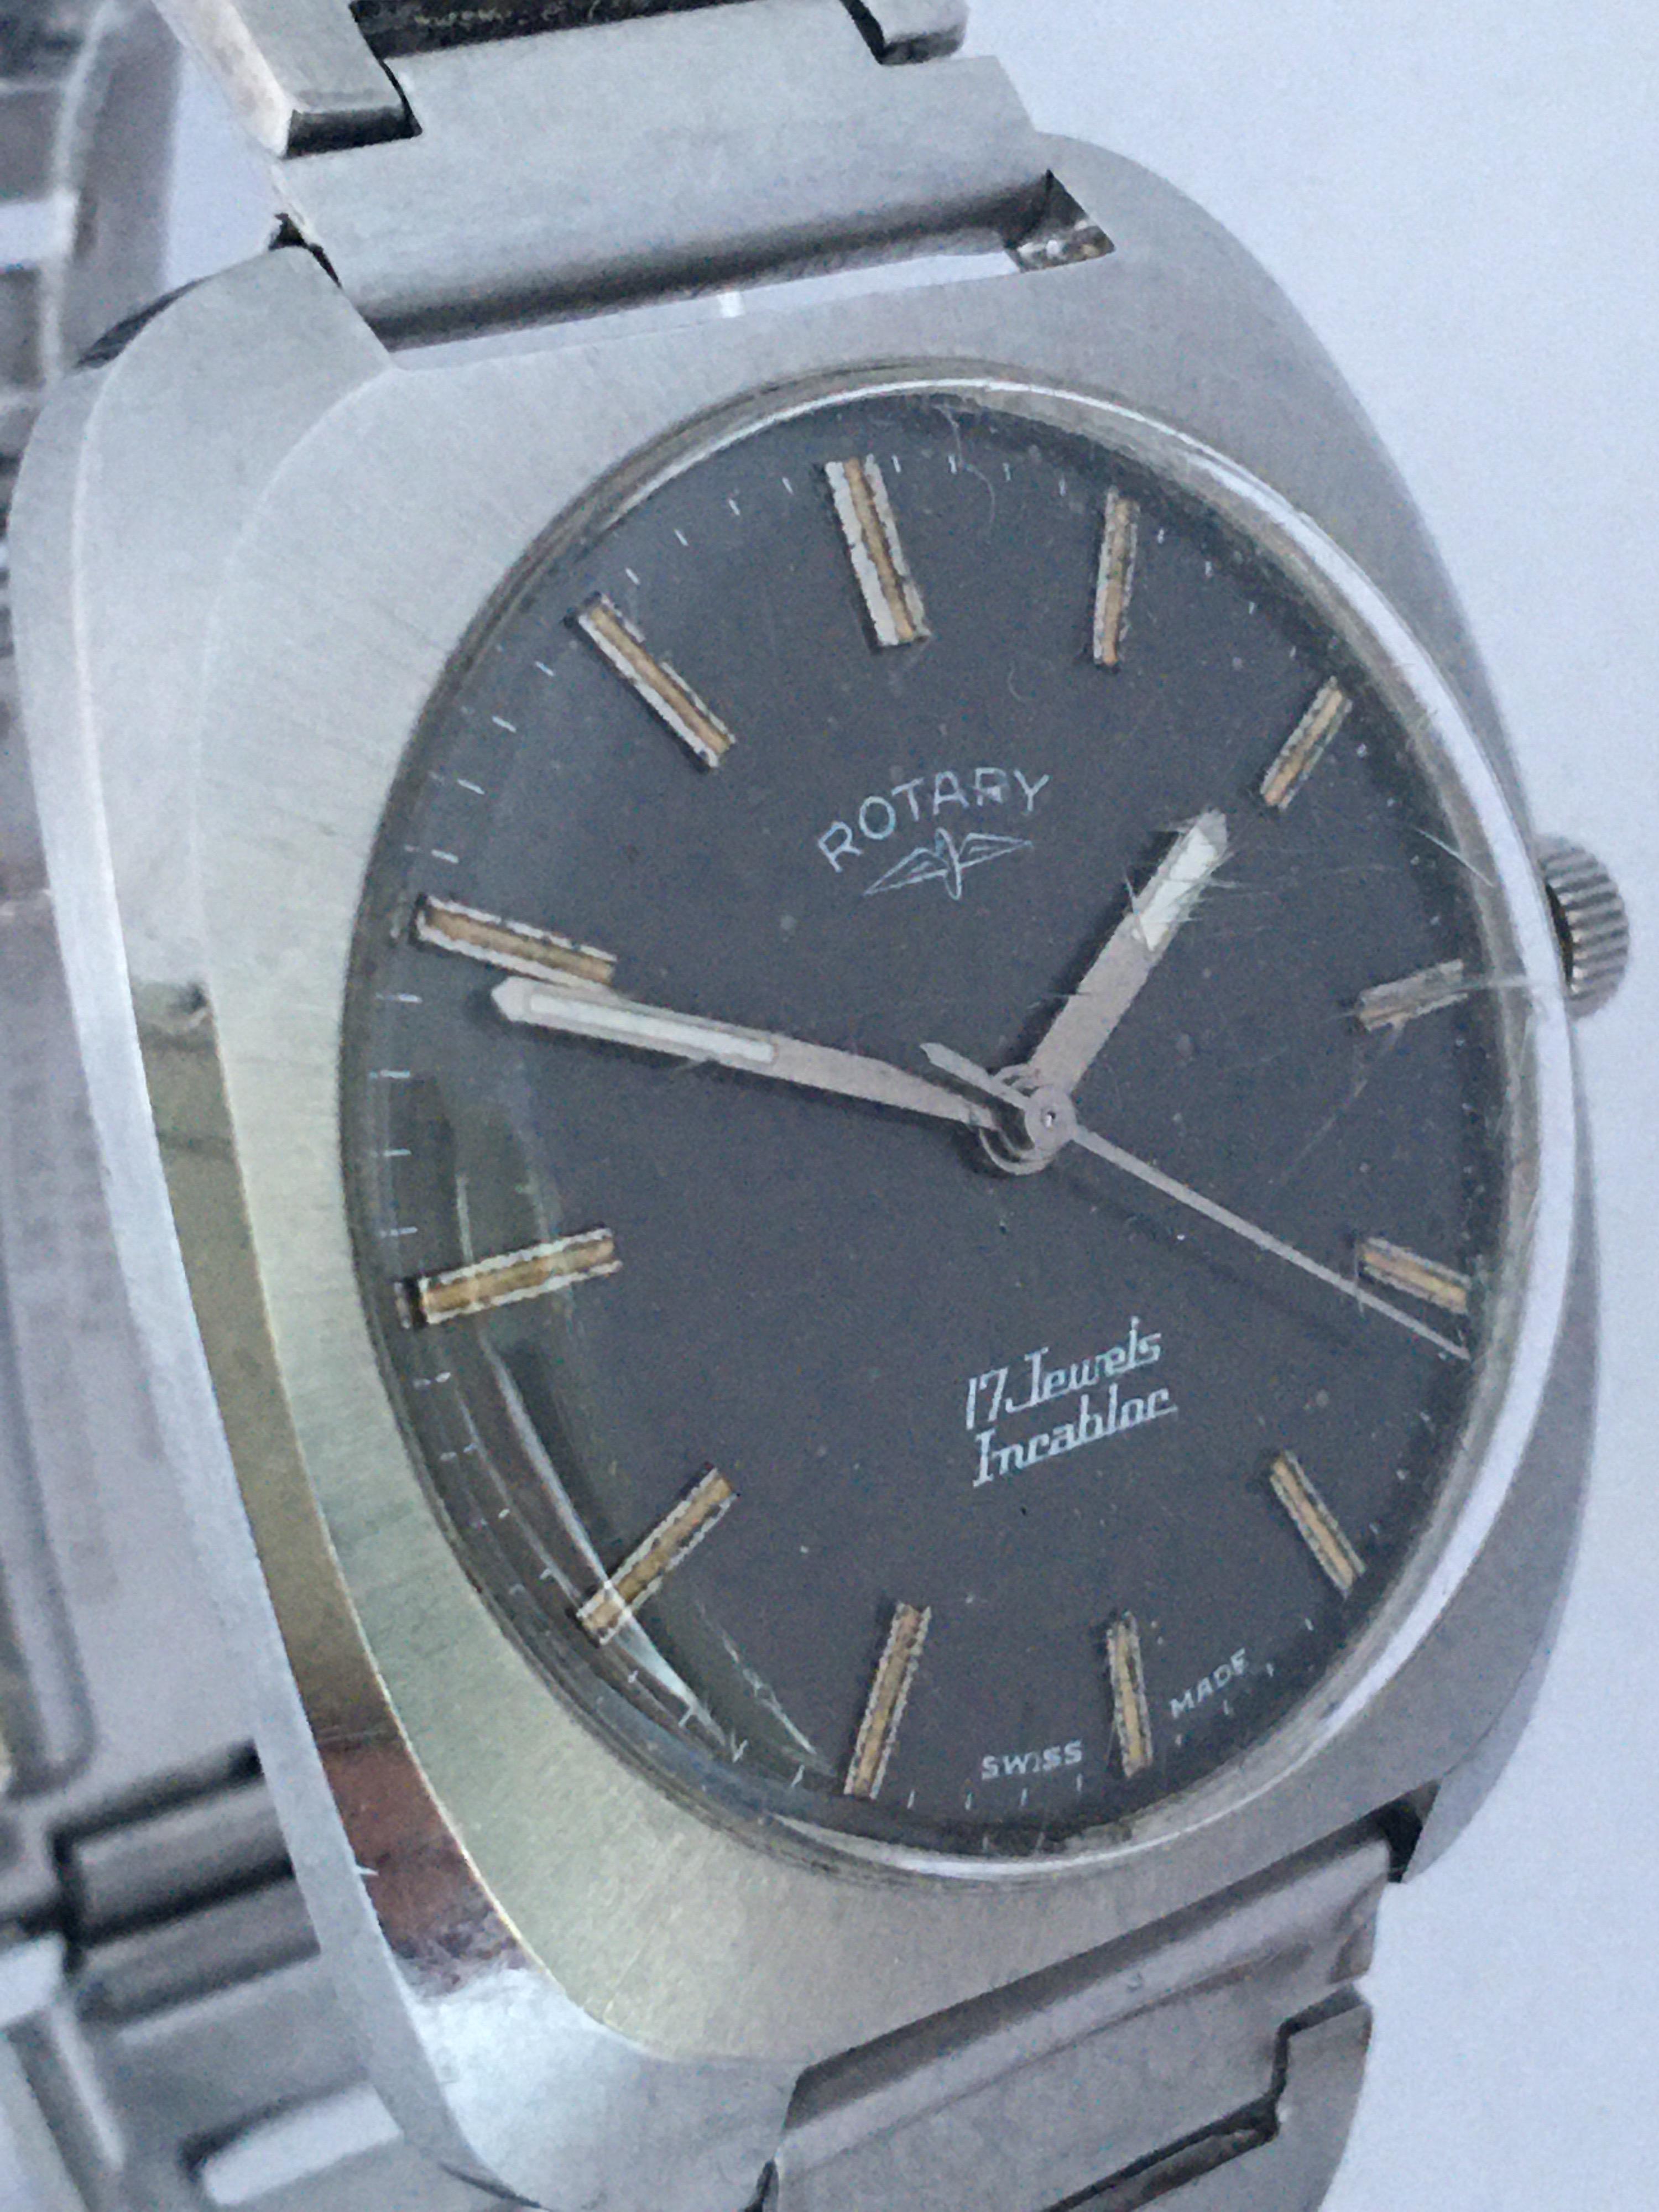 This beautiful pre-owned manual winding Swiss Watch is in good Working condition and it is ticking well. Visible signs of ageing and wear with scratches on the glass and on the watch case.

Please study the images carefully as form part of the